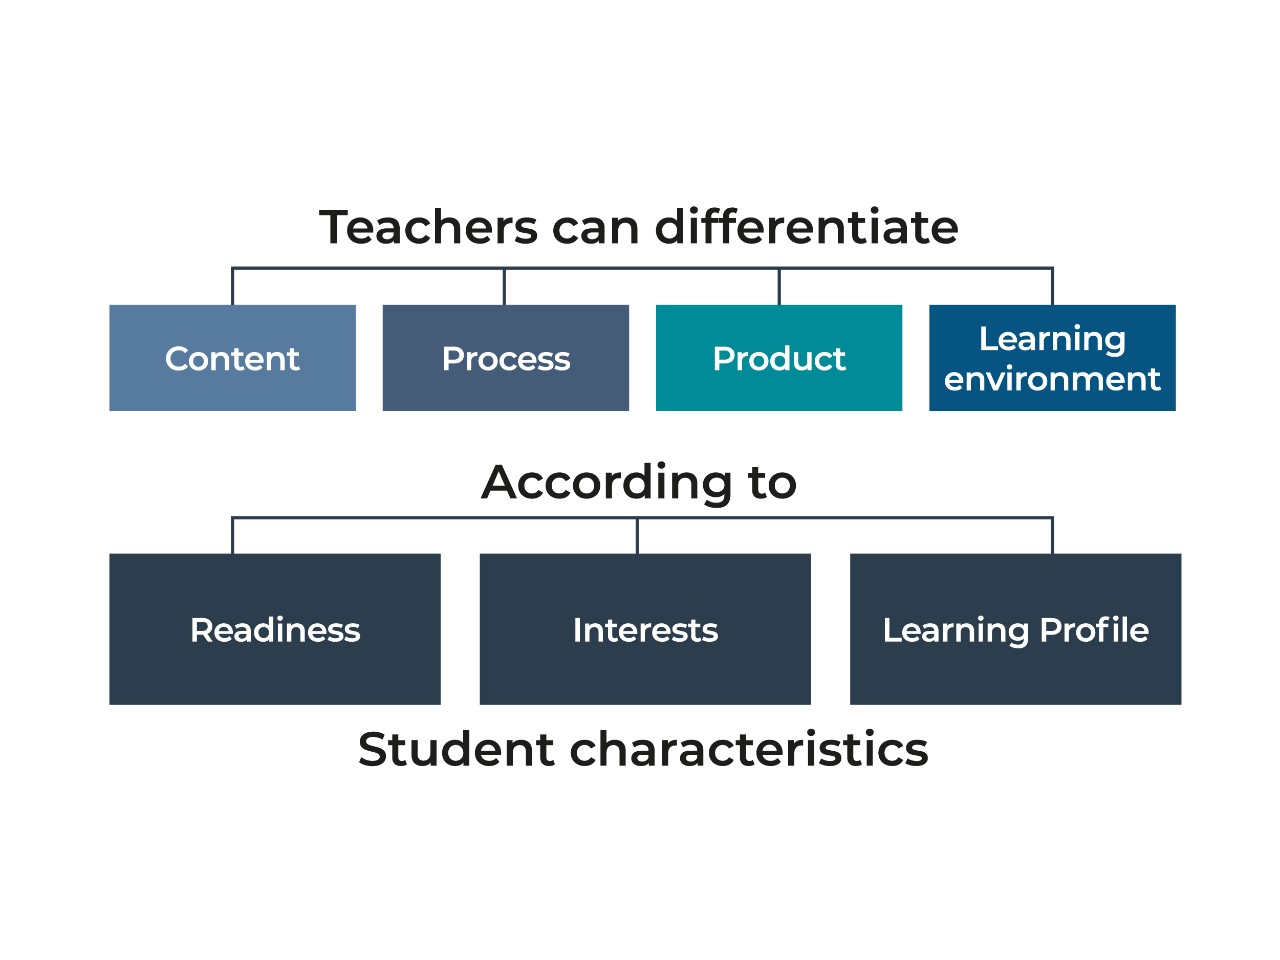 Teachers can differentiate according to student characteristics